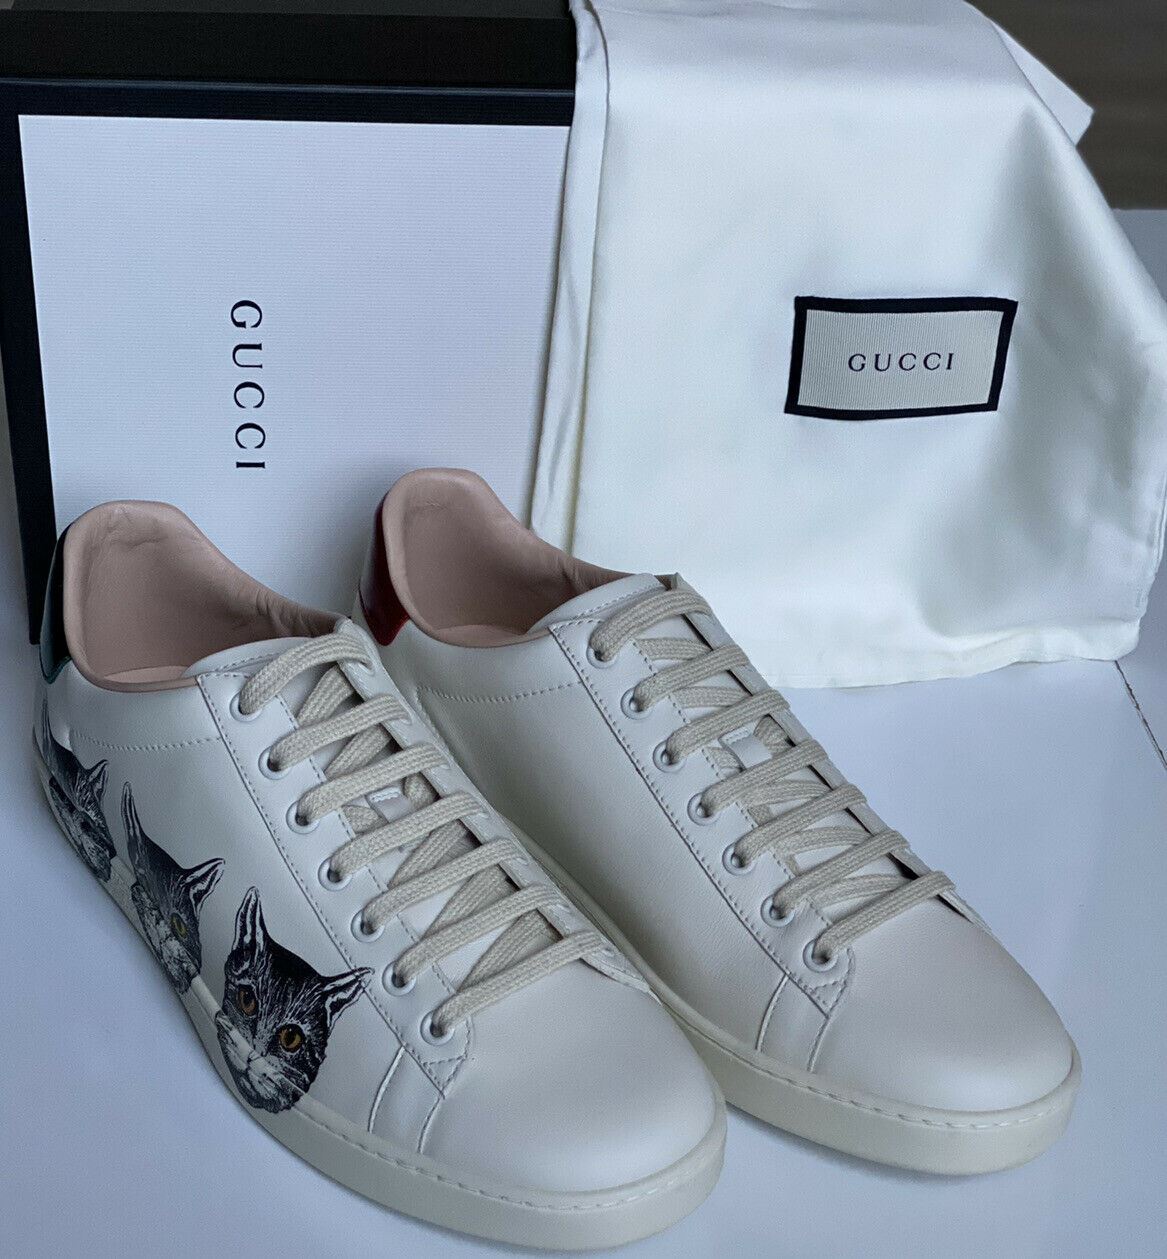 NIB Gucci Ace Mystic Cats Leather Low Top Sneakers 10.5 US (40.5 Euro) 577147